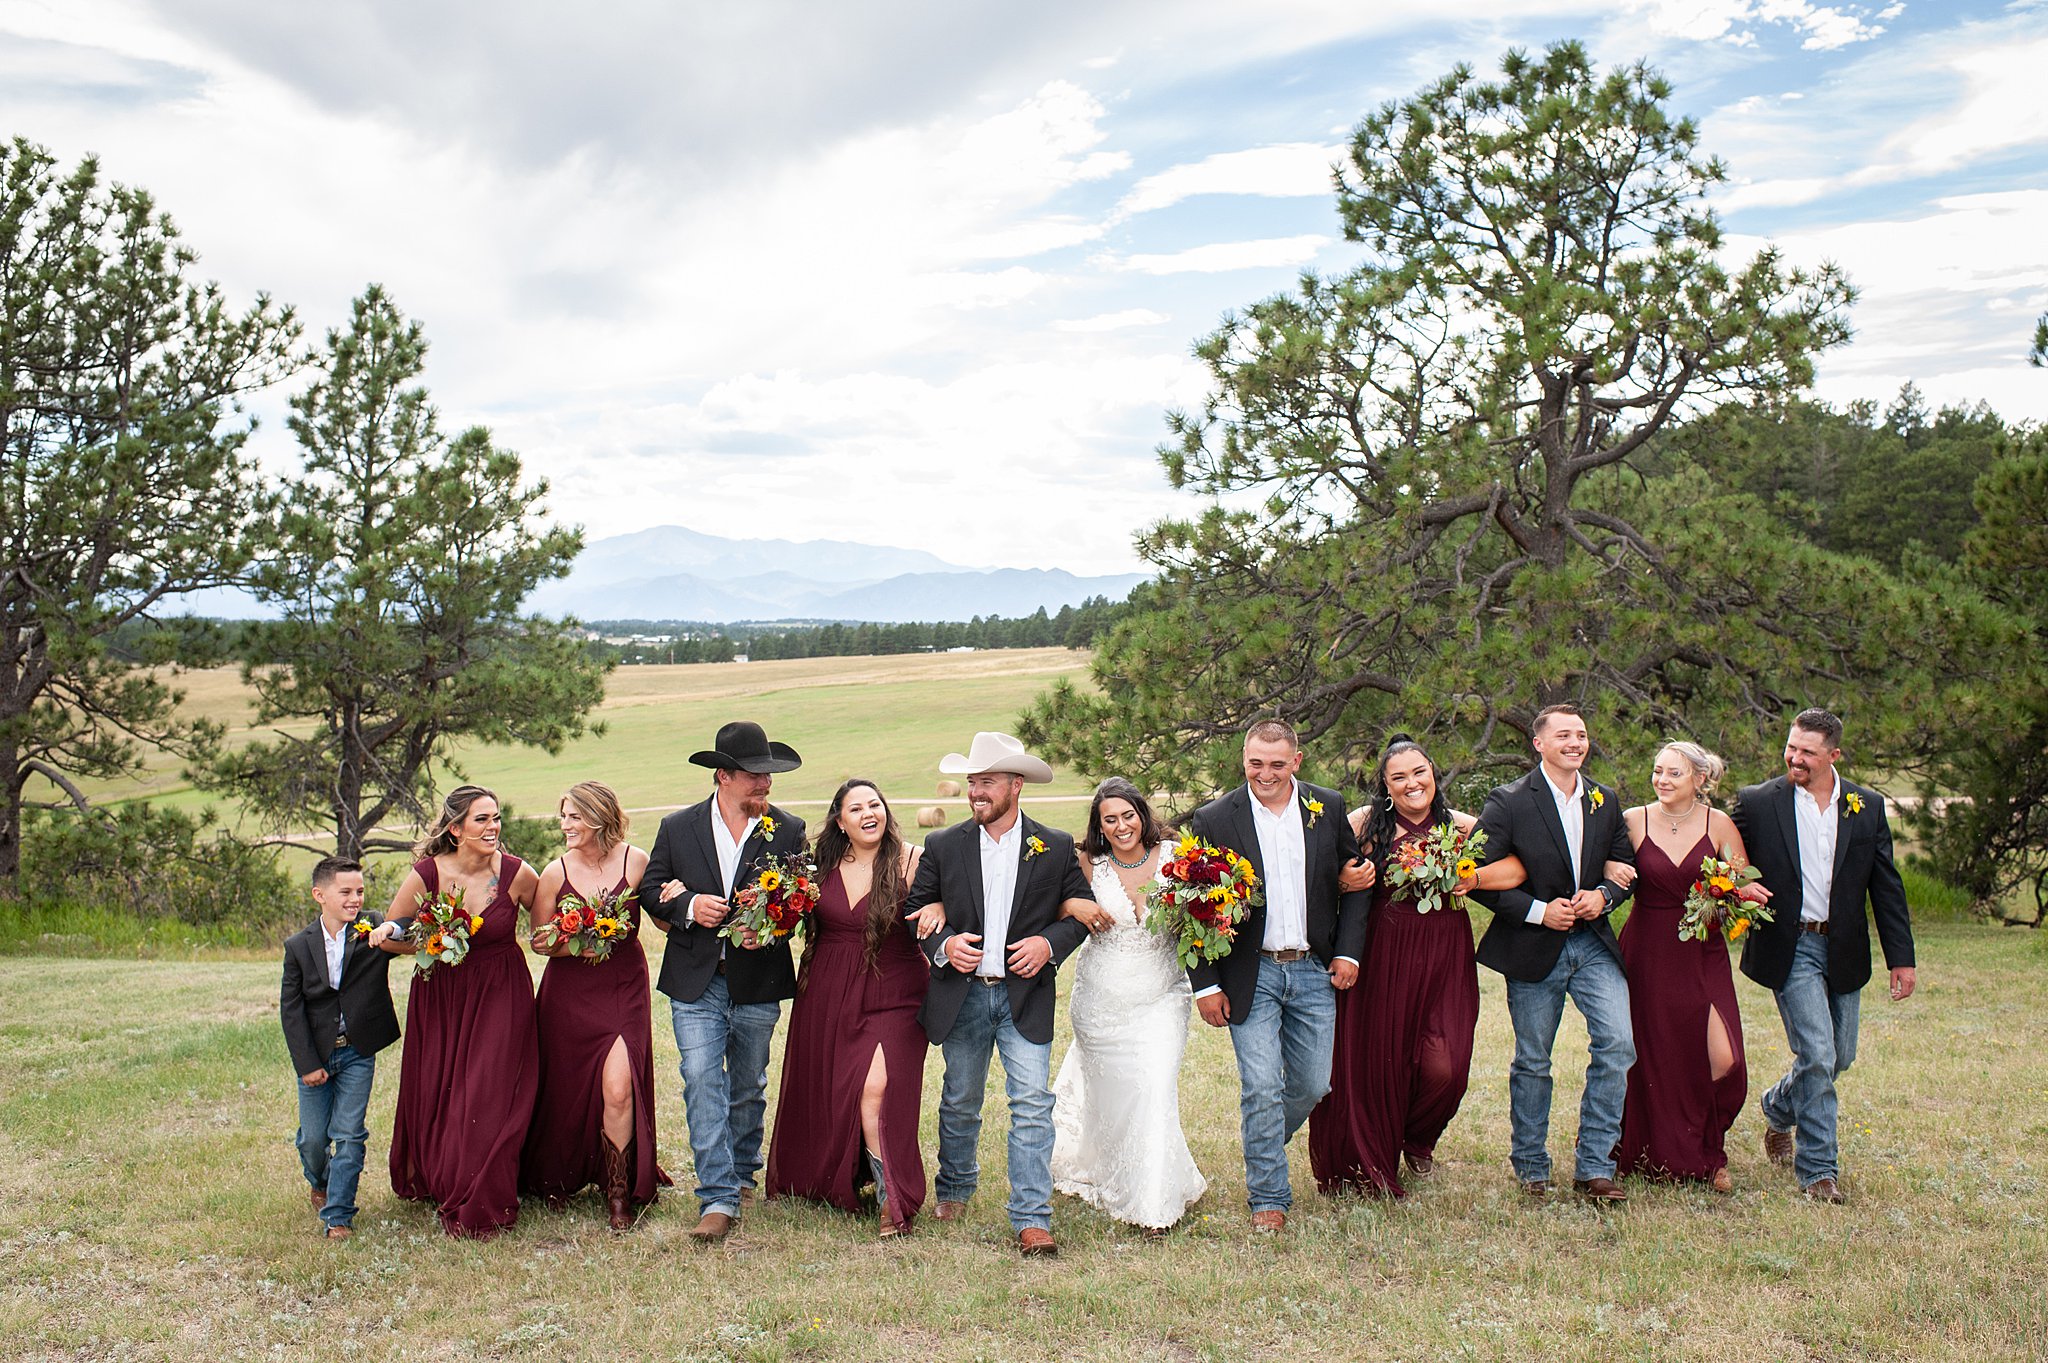 Newlyweds walk arm in arm with their wedding party through a pasture